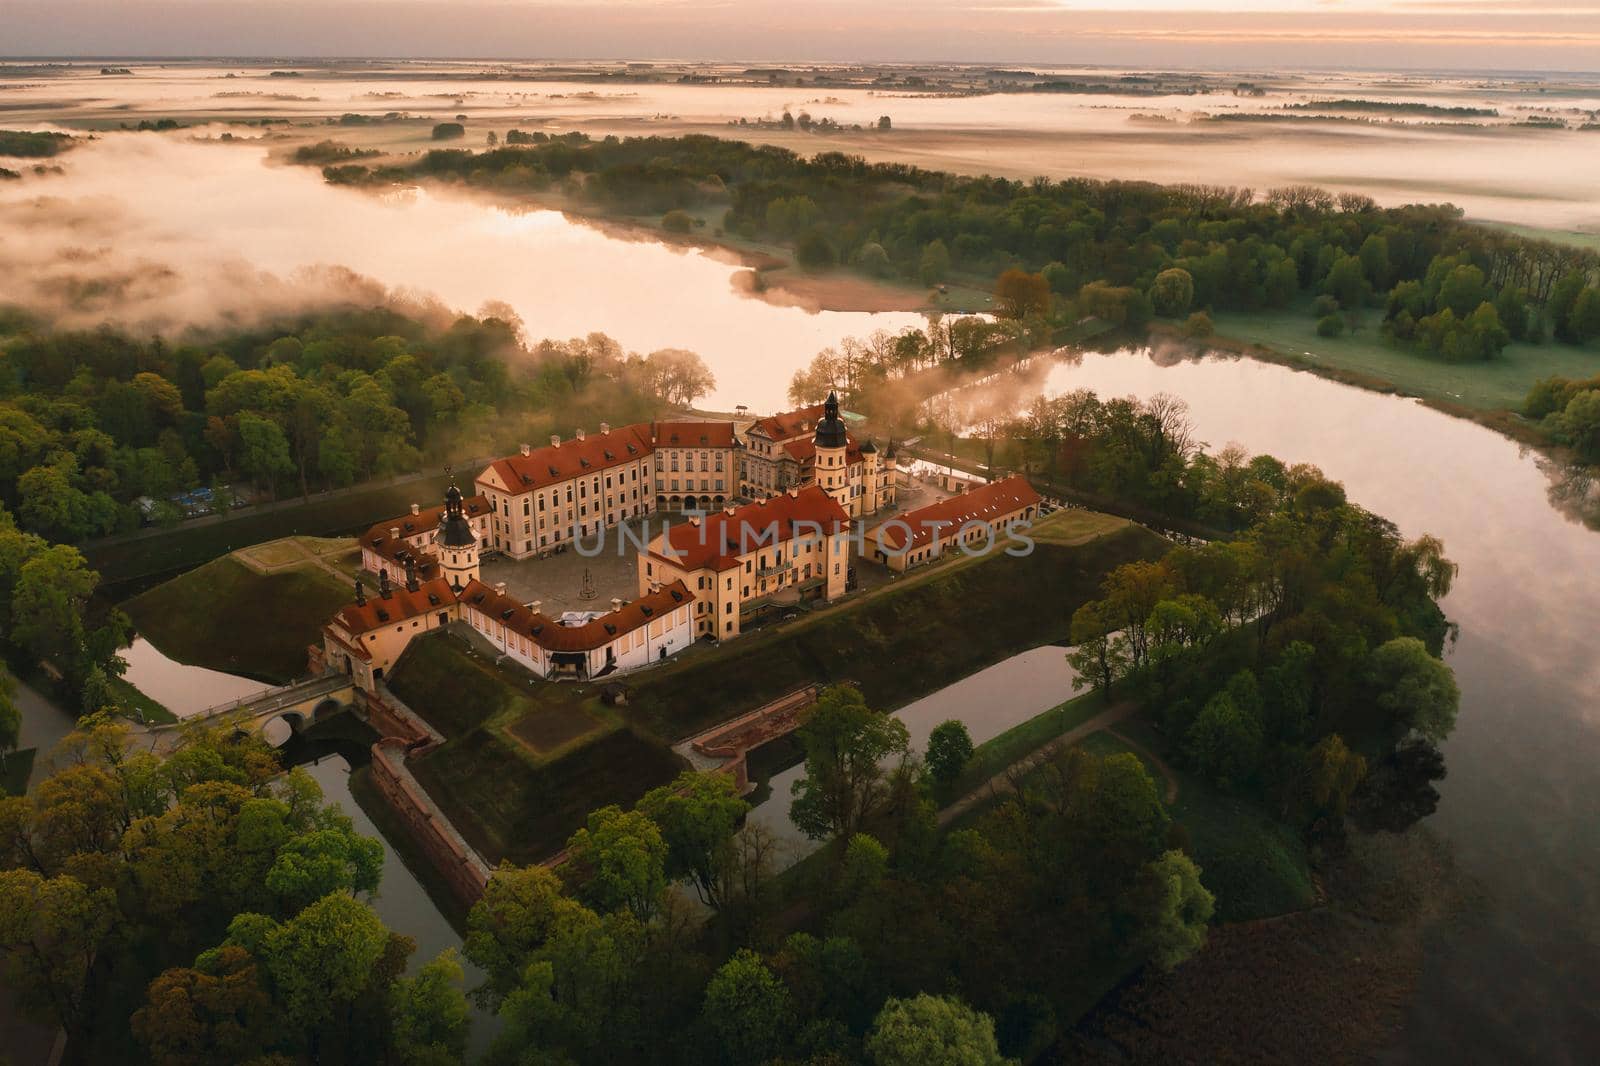 Nesvizh castle is a residential castle of the Radziwill family in Nesvizh, Belarus, with a beautiful view from above at dawn by Lobachad